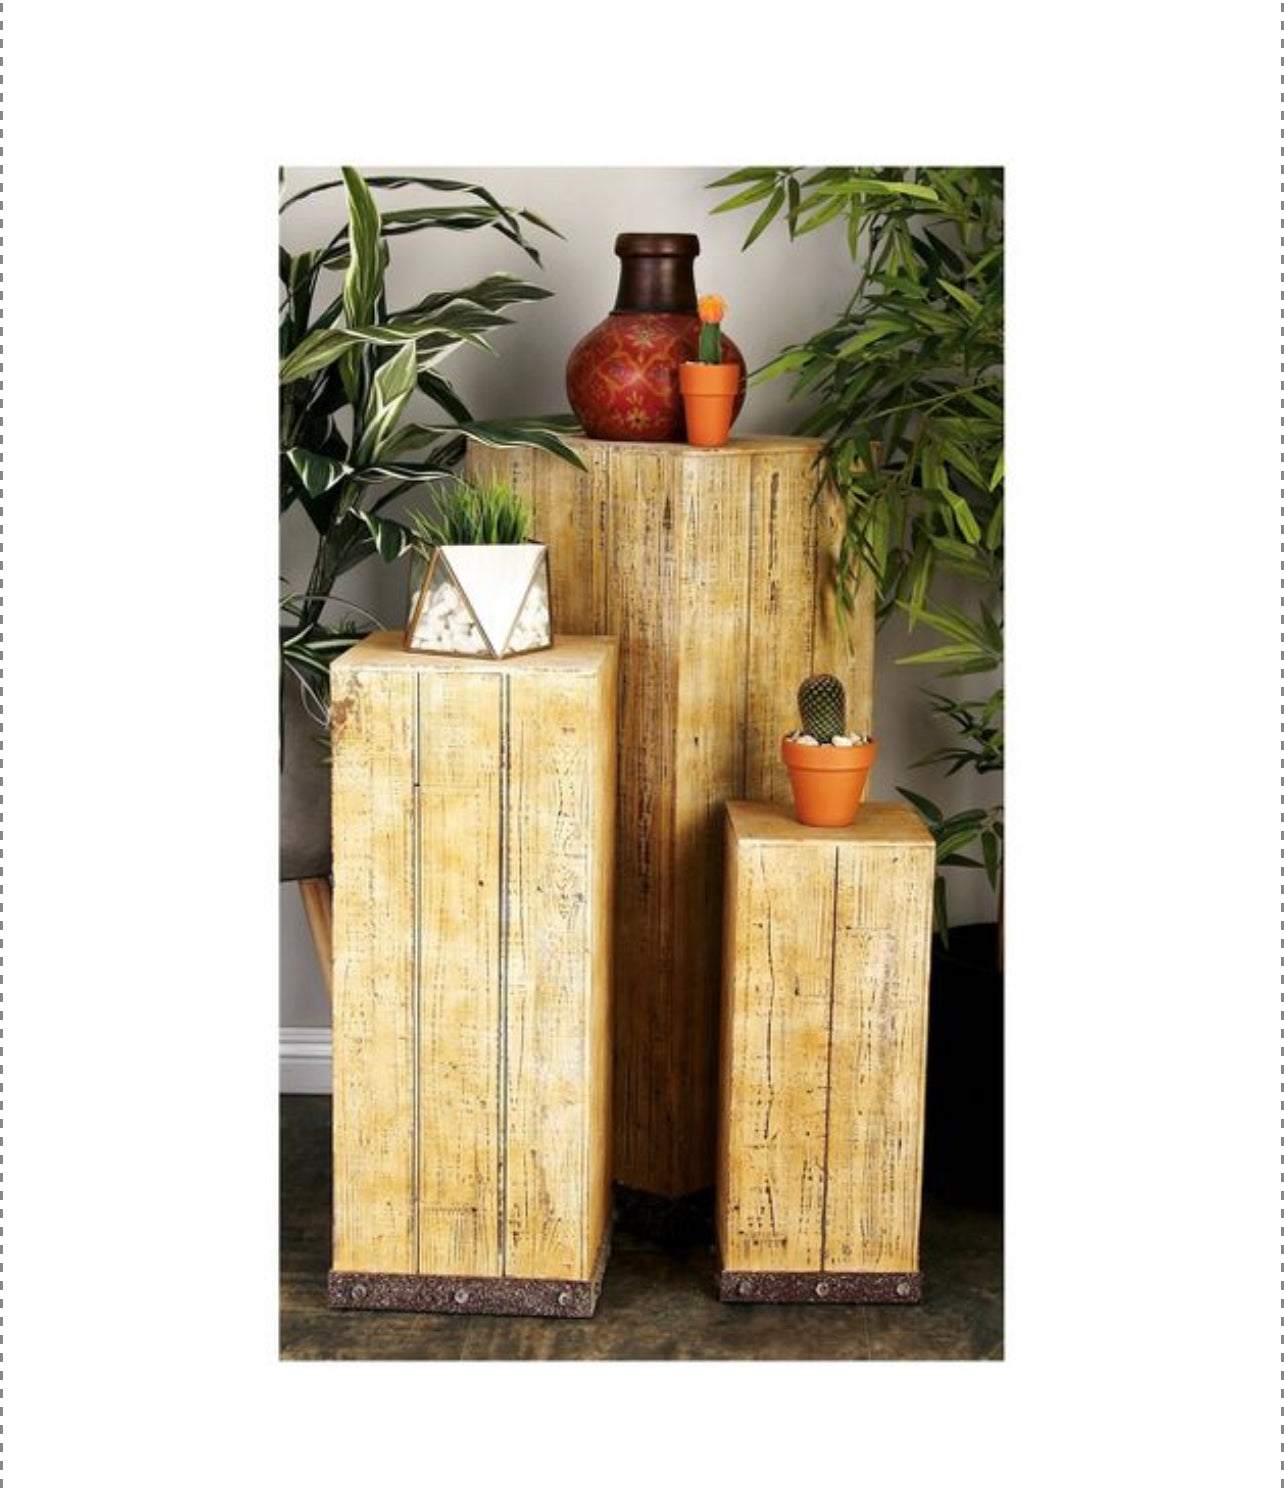 Wood (Set of 3) Square Pedestal Accent Tables Natural - Olivia & May